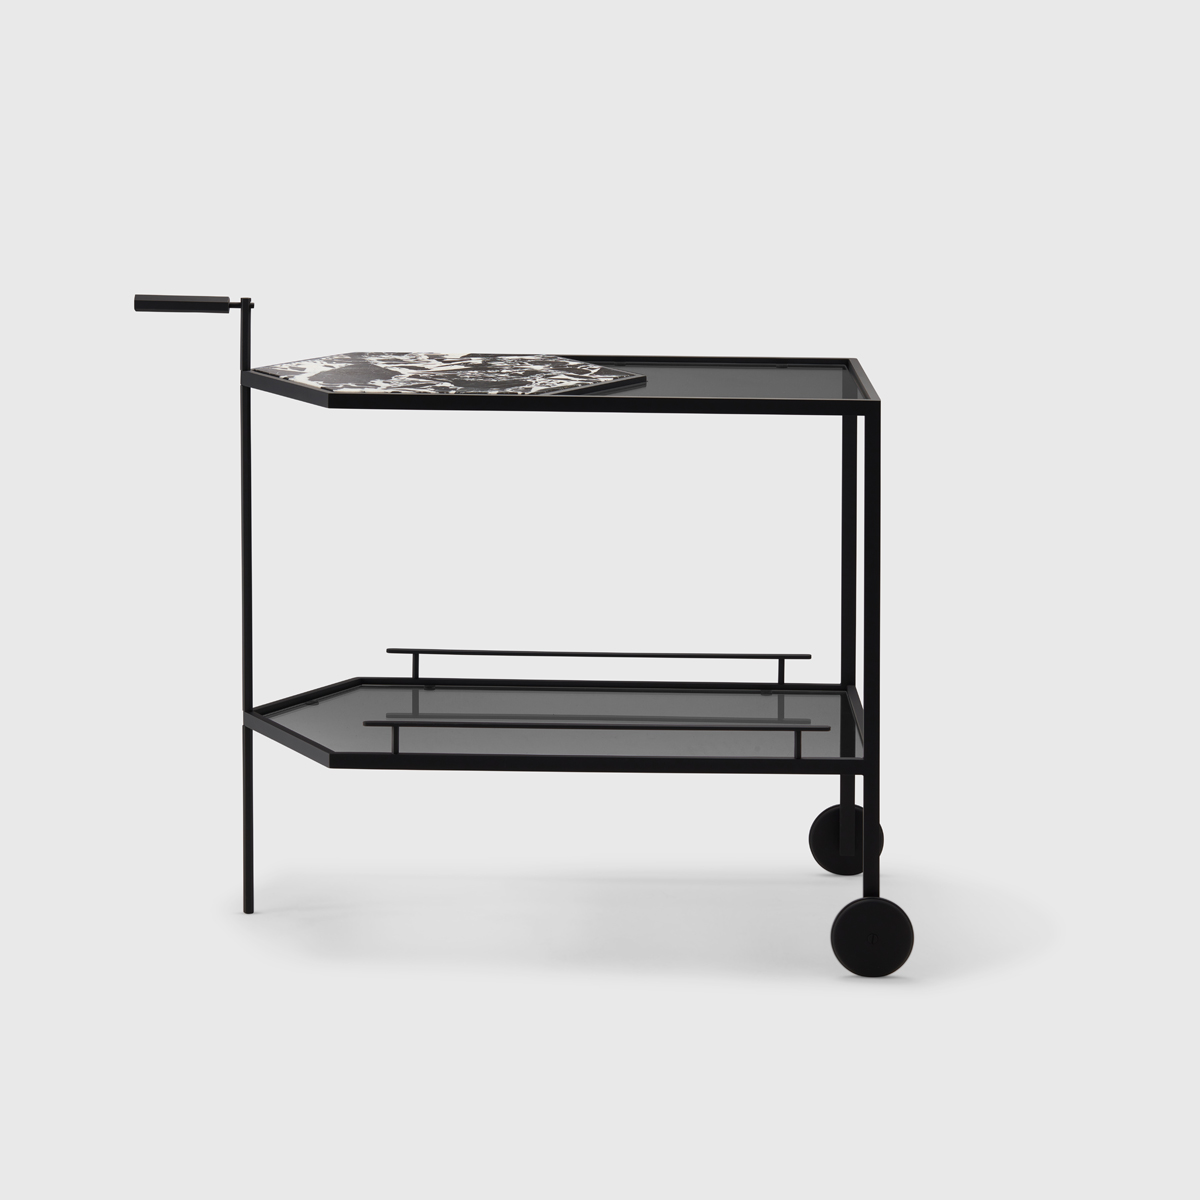 Gin Lane Bar Cart in Soft touch black, grand antique marble and smoke glass